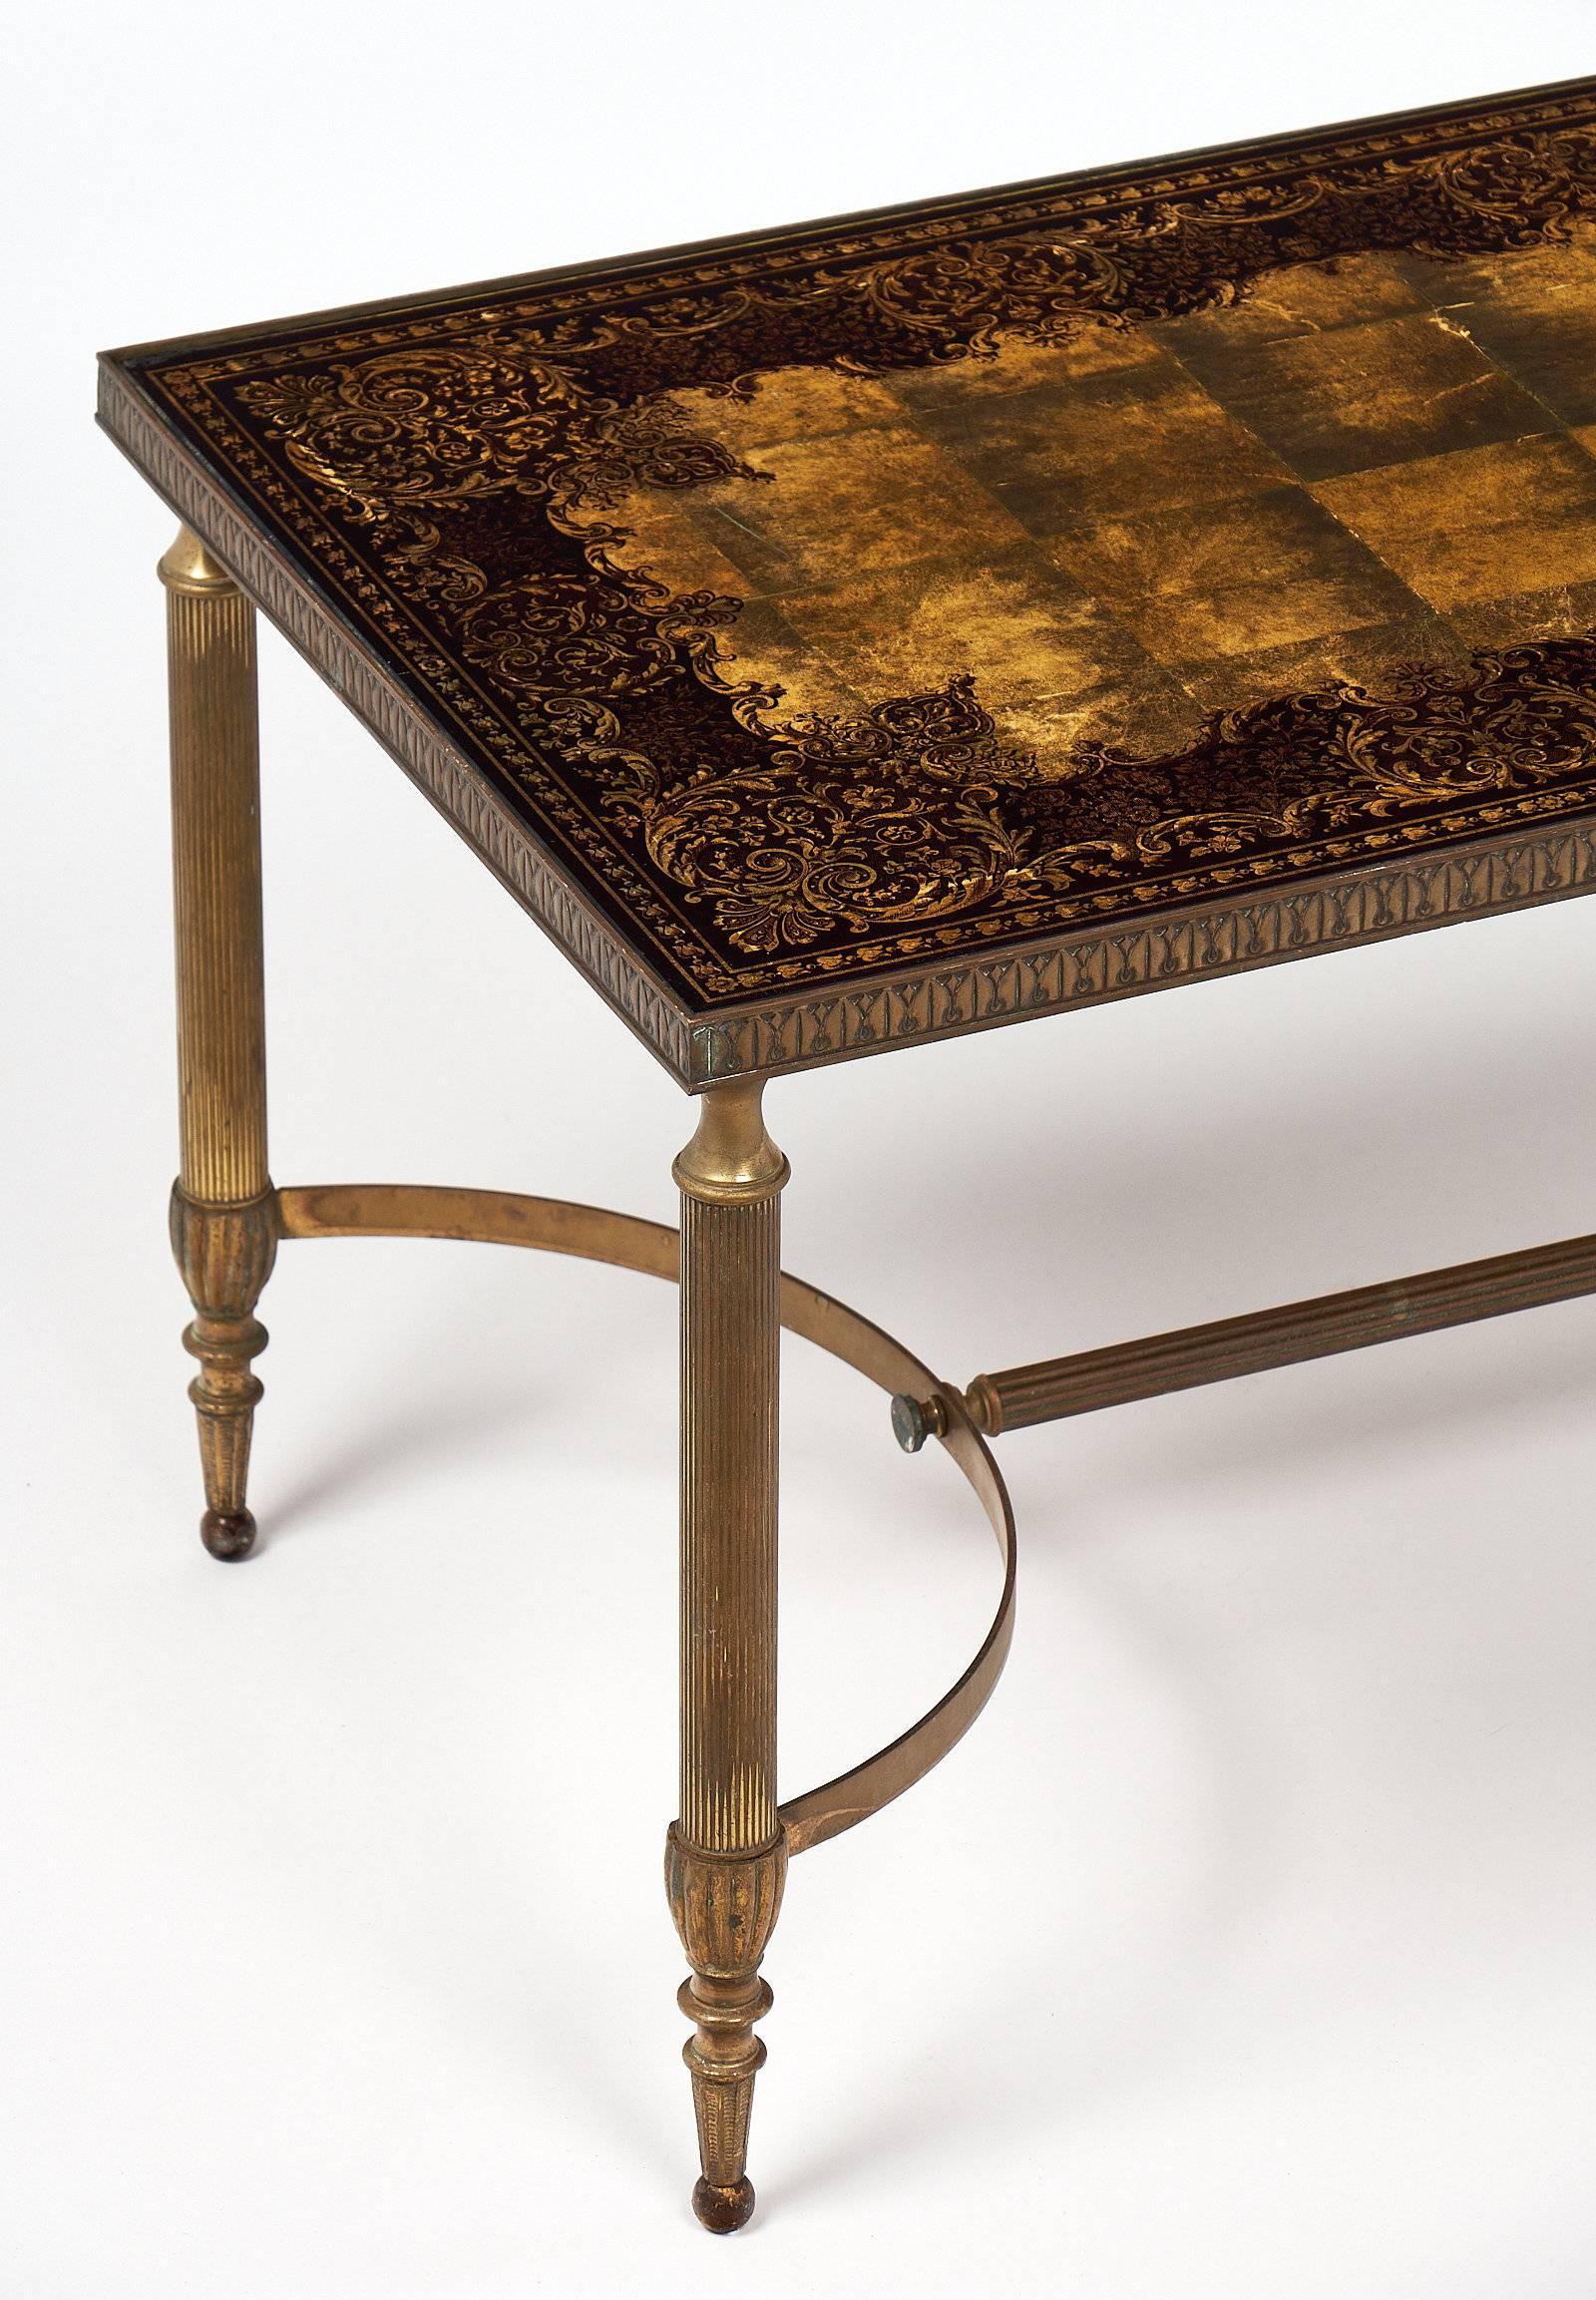 Stunning Art Deco coffee table with a detailed brass base, including stretcher with curved ends. The legs are tapered and fluted. The top is Églomisé glass with a gold and burgundy design including scroll work and floral motifs. This table is an